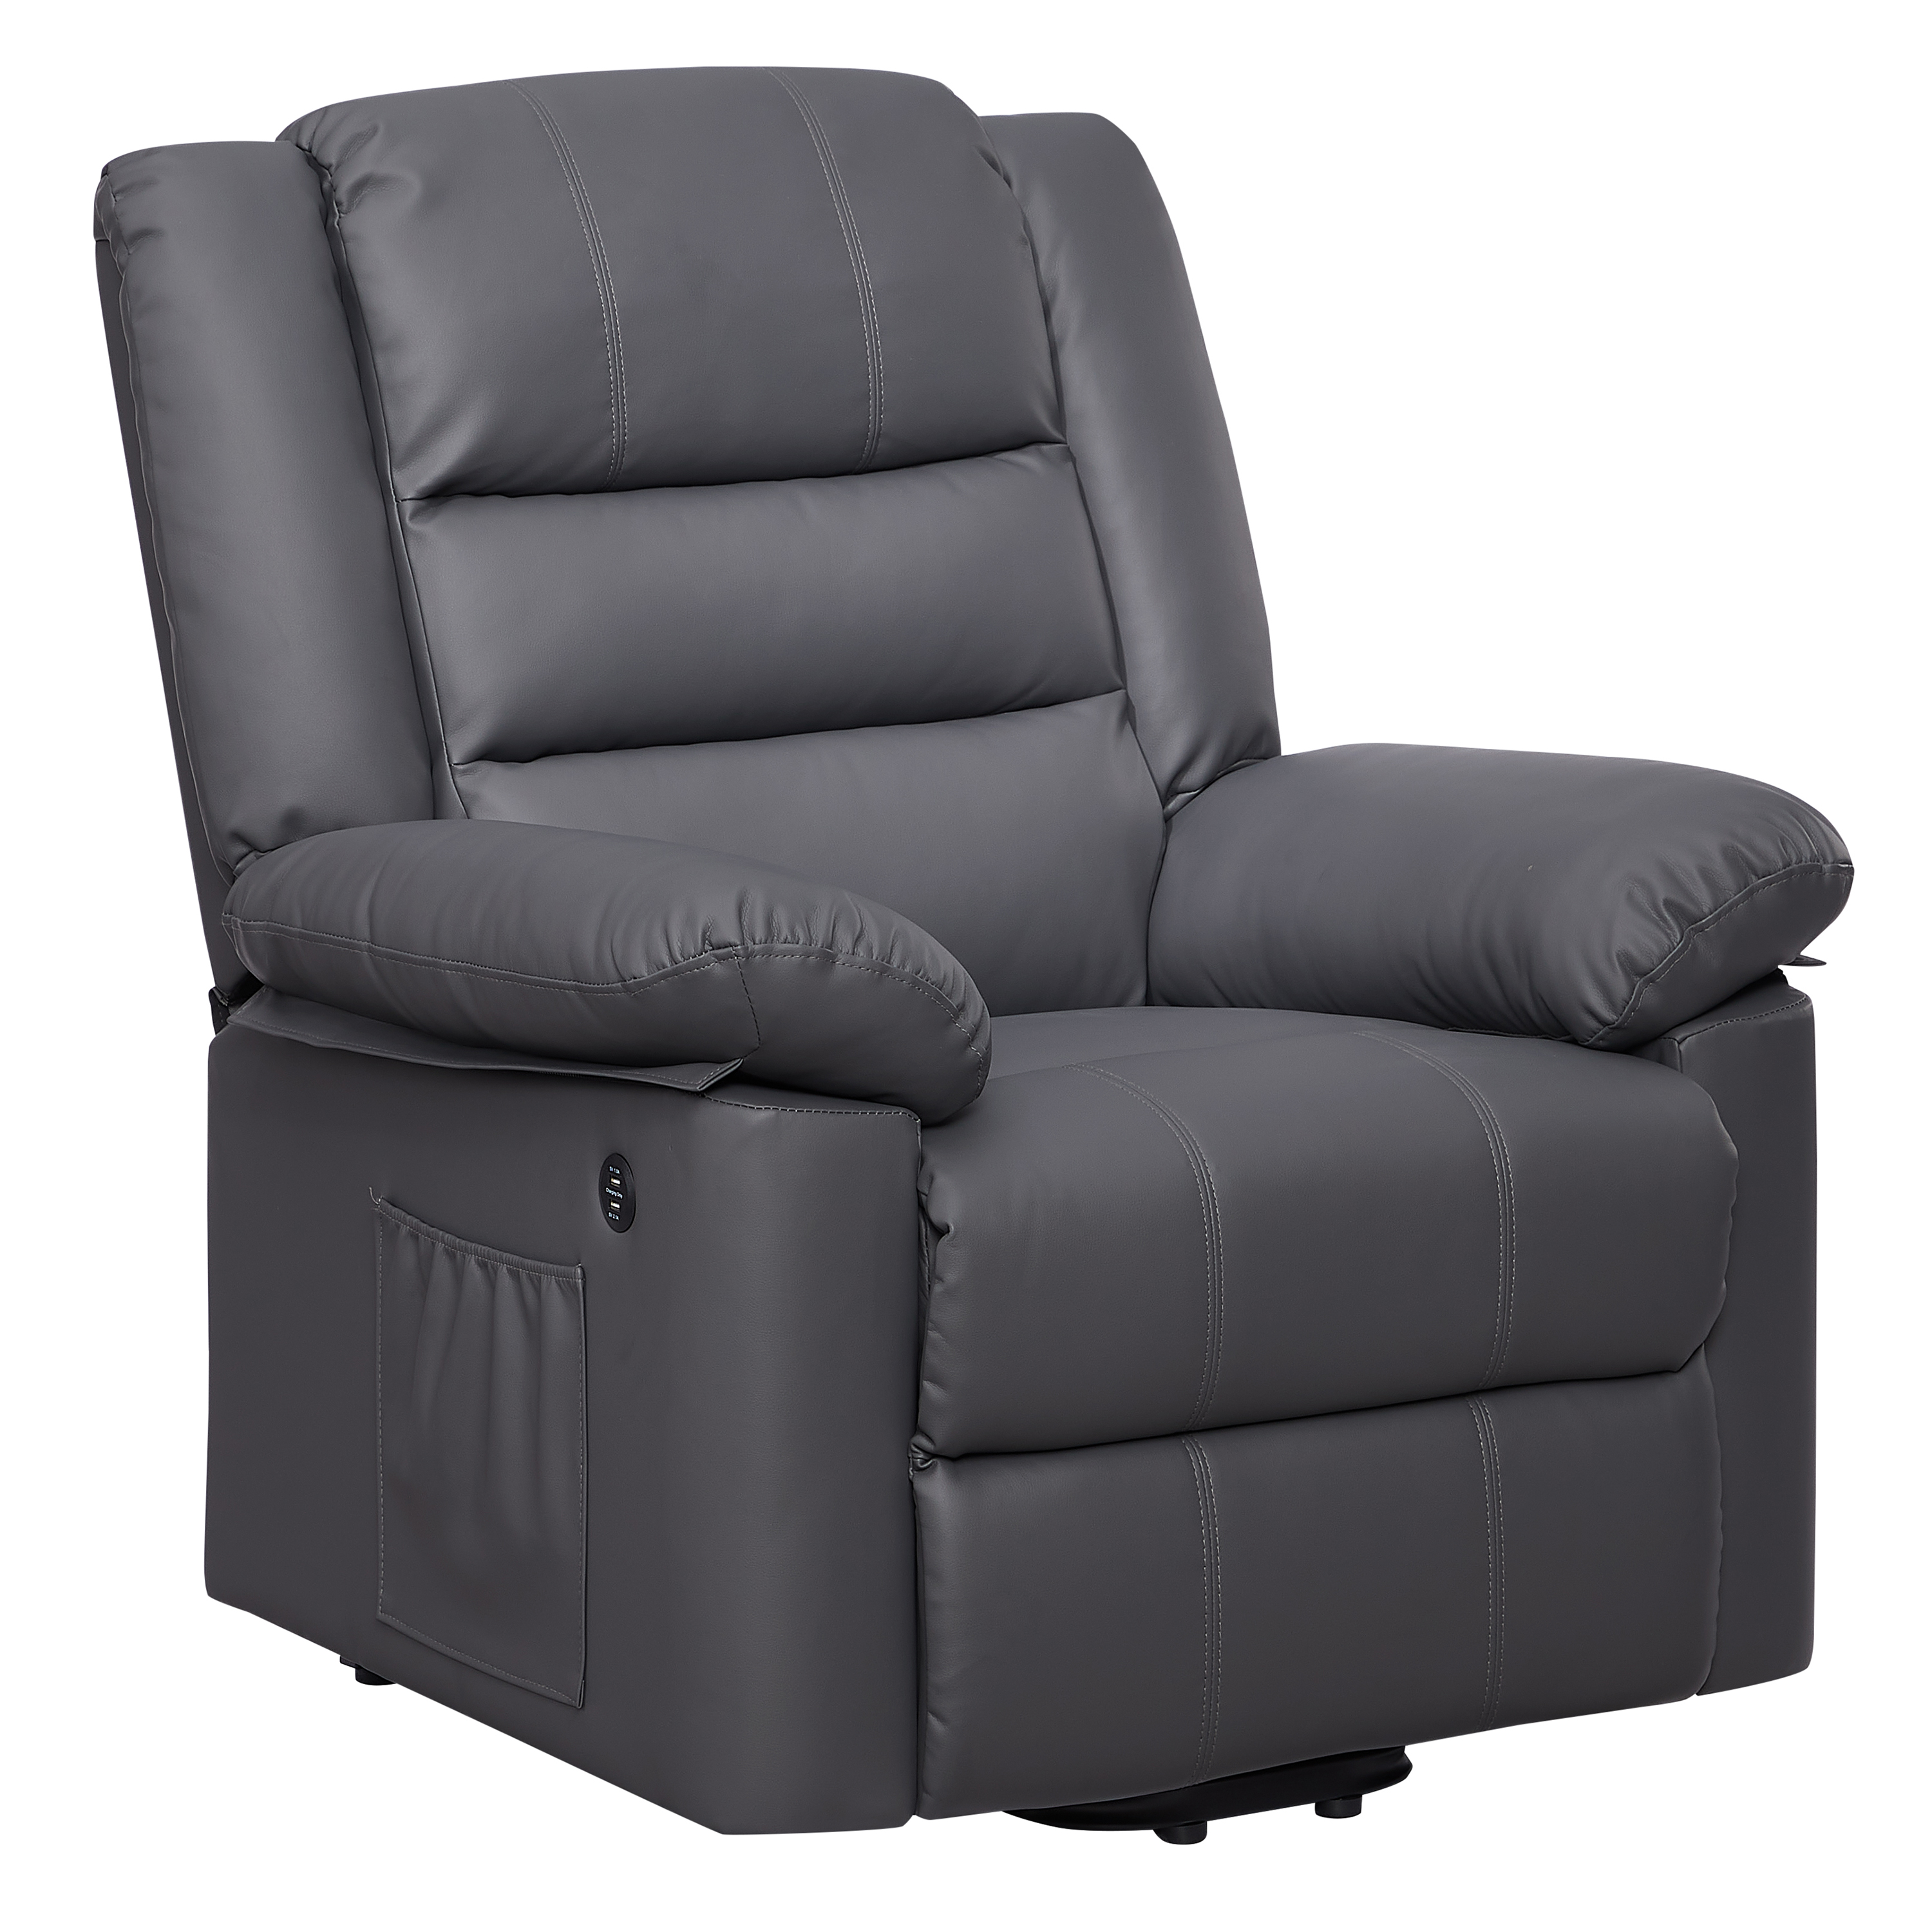 Hillsdale Cedar City Power Lift Faux Leather Recliner with USB, Dusk Gray - image 4 of 23